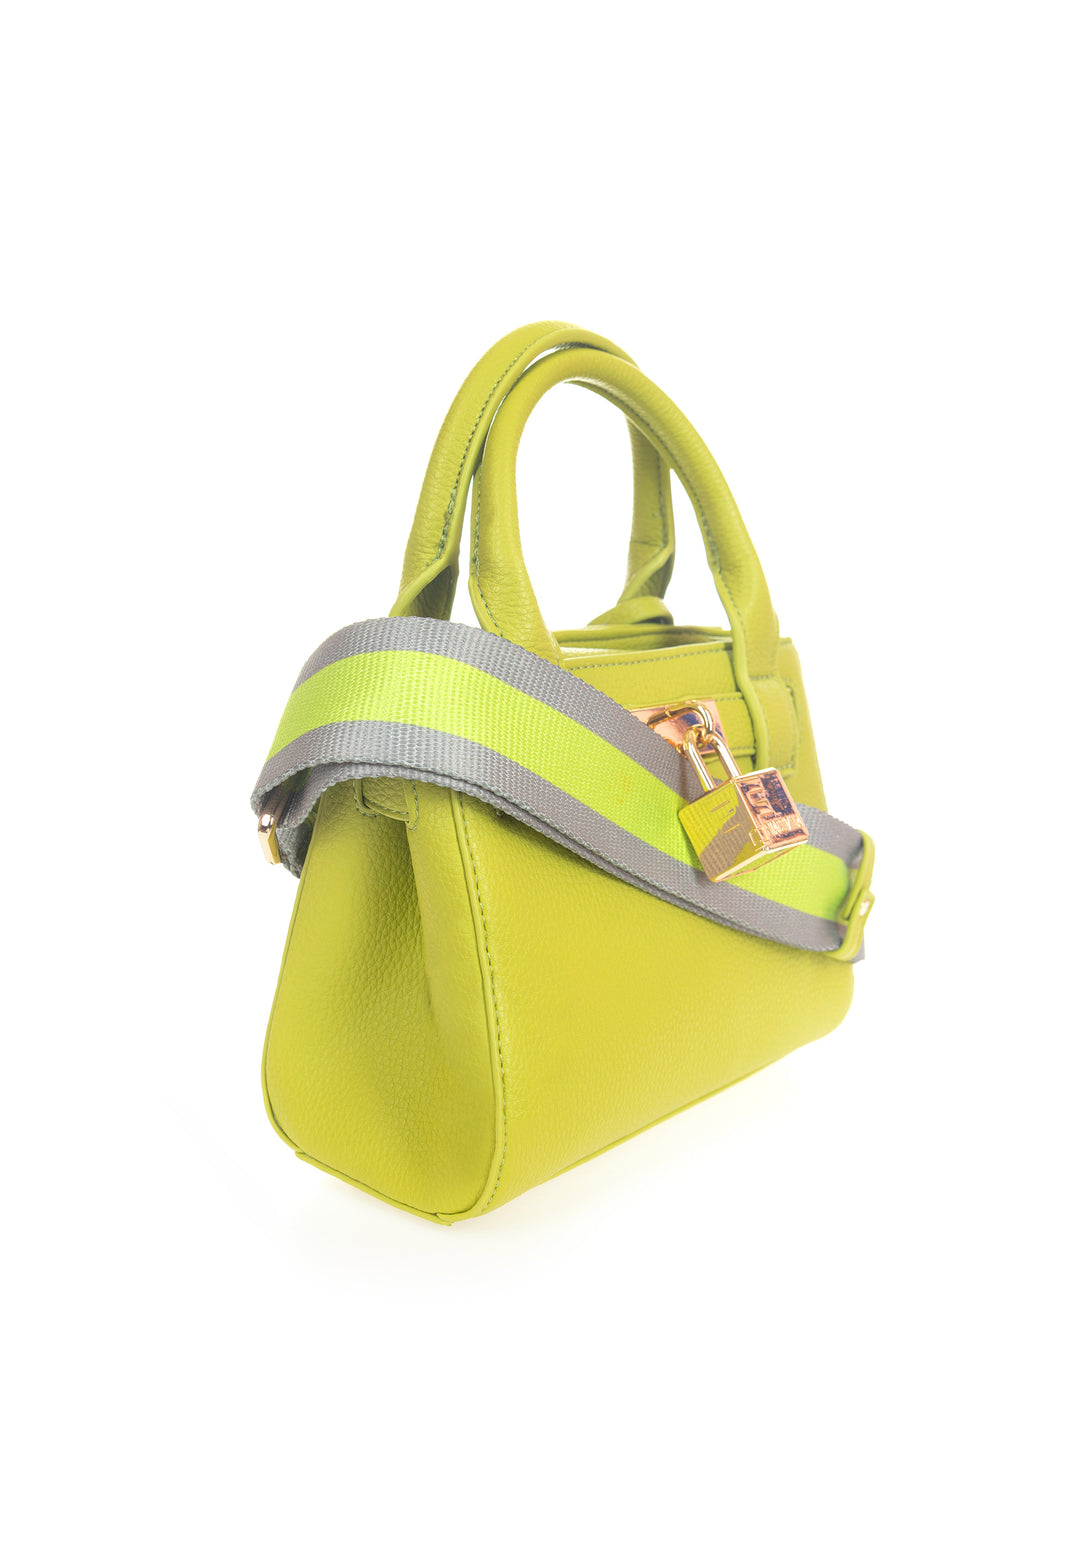 Mini bag made in eco leather with coloured shoulder strap